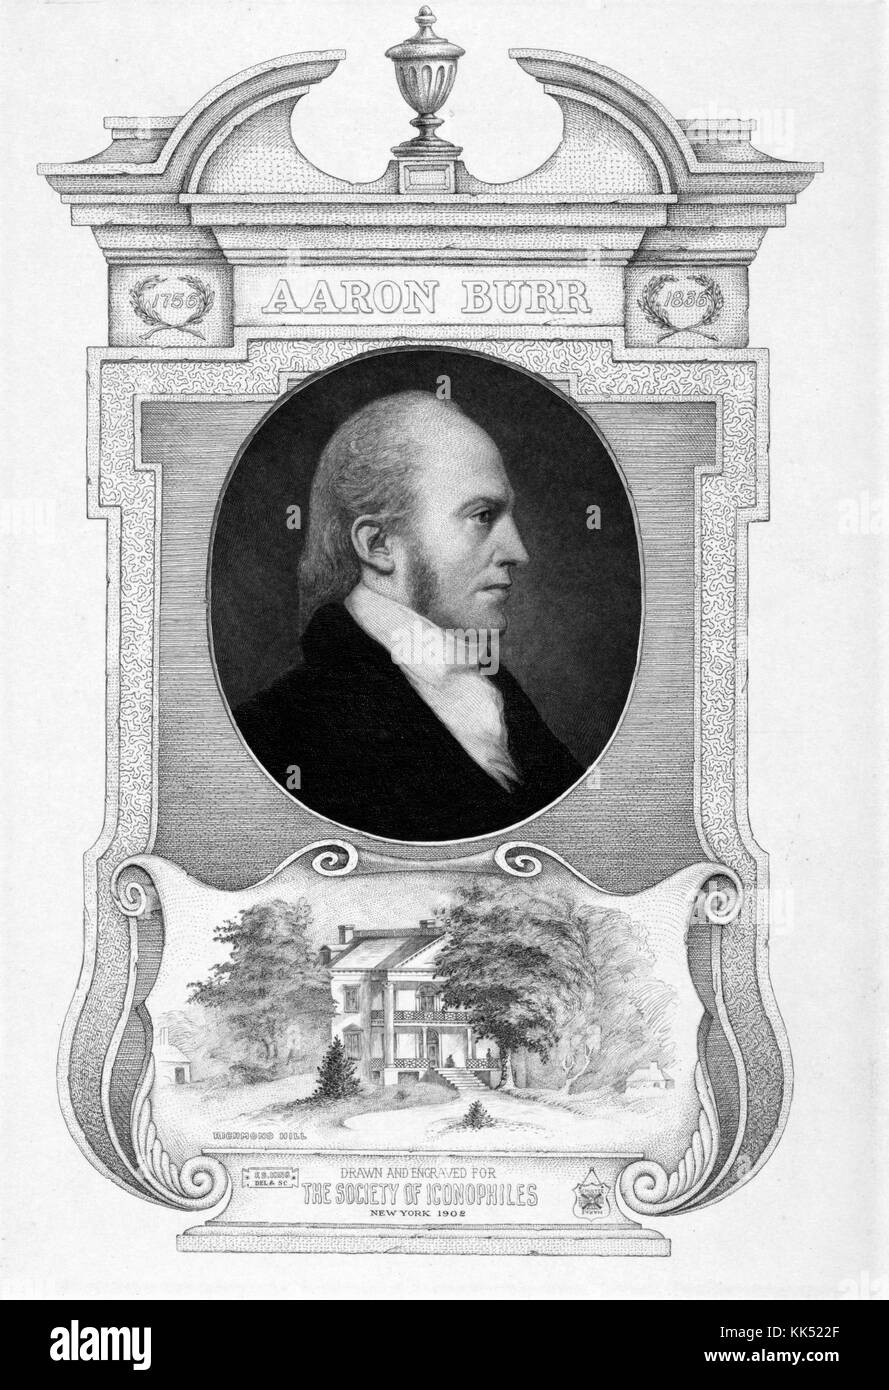 A engraving from a portrait of Aaron Burr, he was an American politician that held several offices, he was the New York State Attorney General before becoming a United States Senator, after the Senate he became the 3rd Vice President of the United States under Thomas Jefferson, he may be most famous for the pistol duel in which he killed Alexander Hamilton, the engraving also contains an image of Richmond Hill which was a Burr's home in Manhattan, 1790. From the New York Public Library. Stock Photo